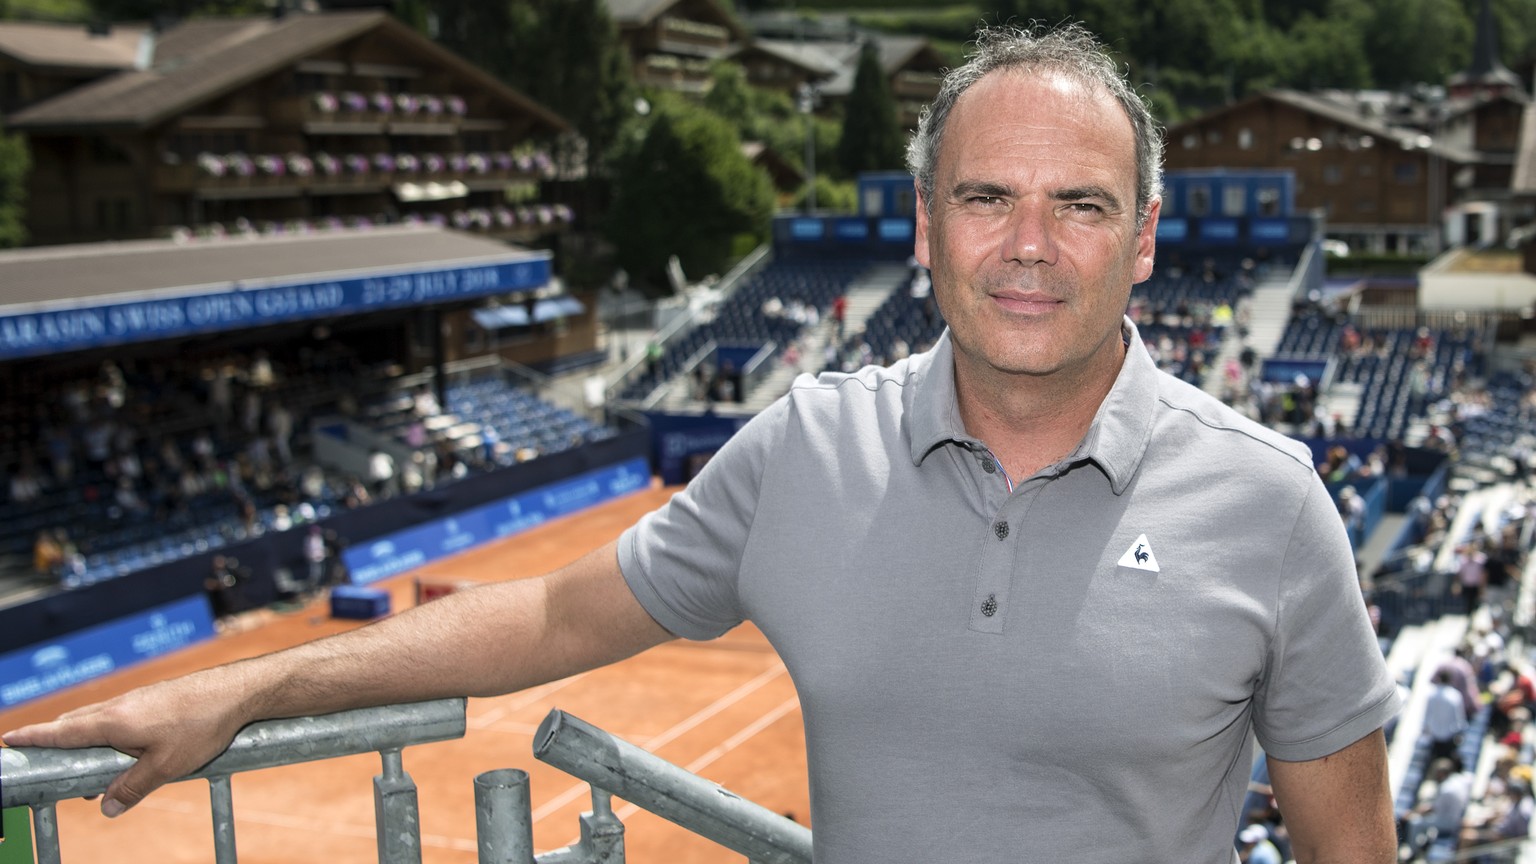 Jeff Collet, tournament director poses at the Swiss Open tennis tournament in Gstaad, Switzerland, Friday, July 28, 2017. (KEYSTONE/Peter Schneider)